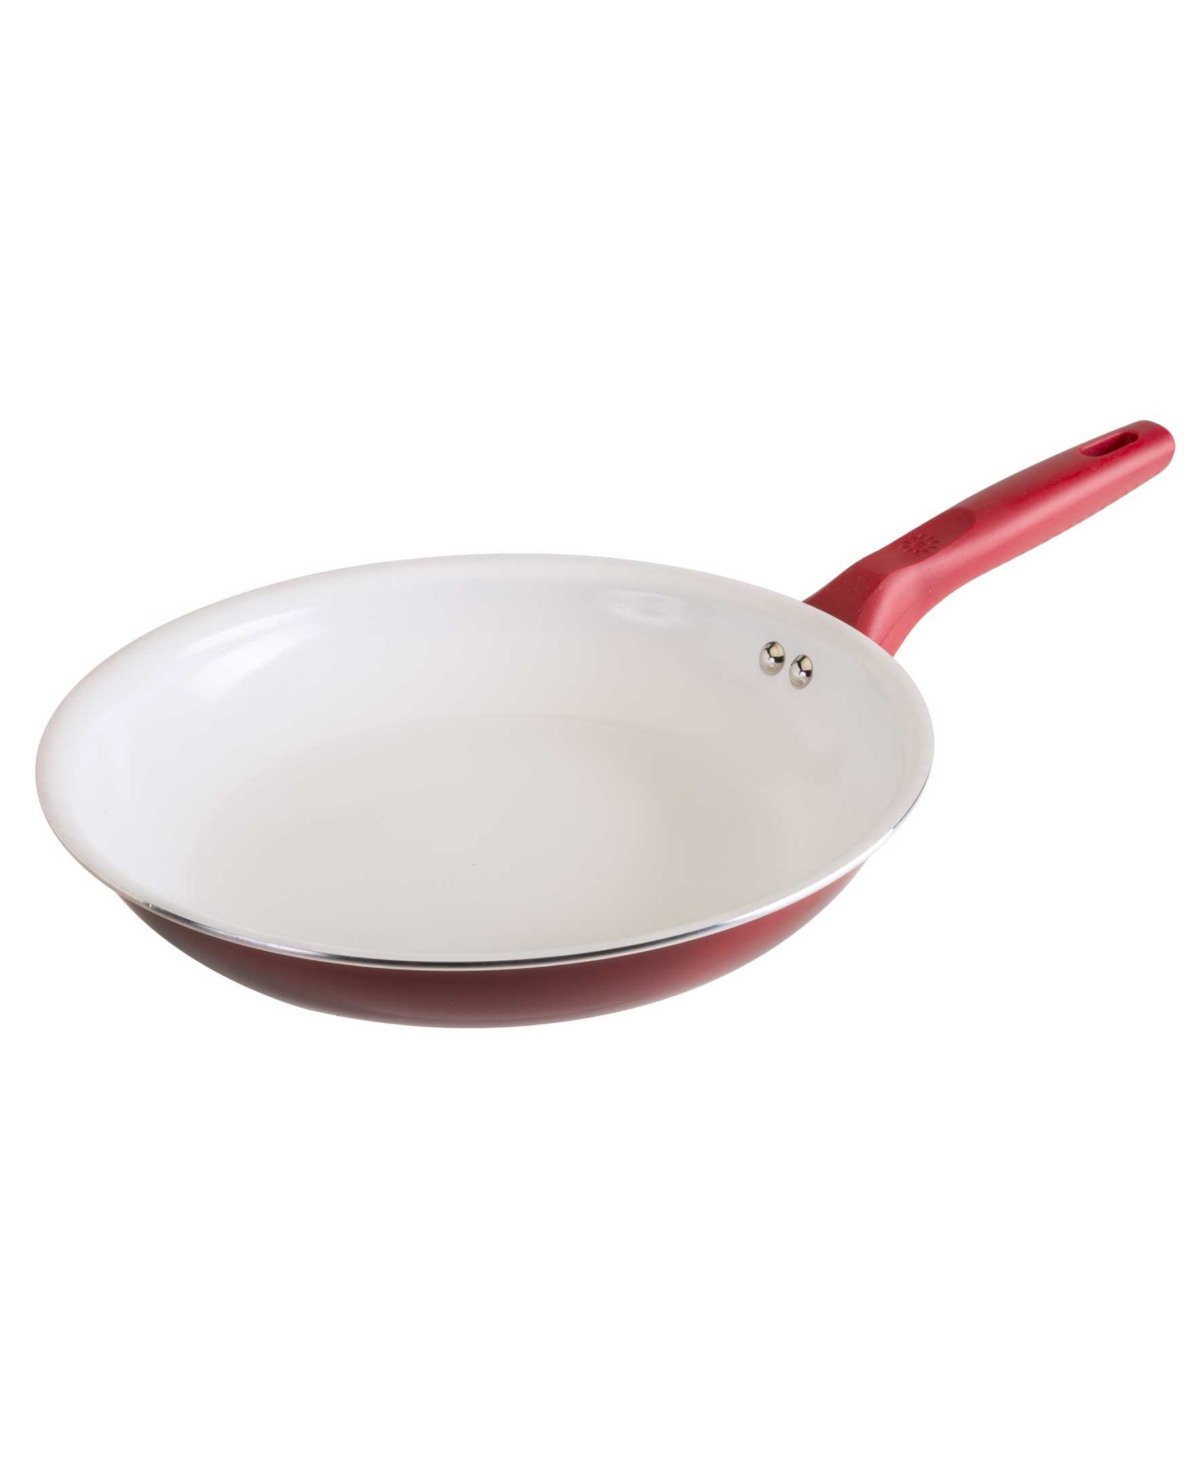 Ecolution Aluminum 11" Bliss Non-stick Fry Pan In Red